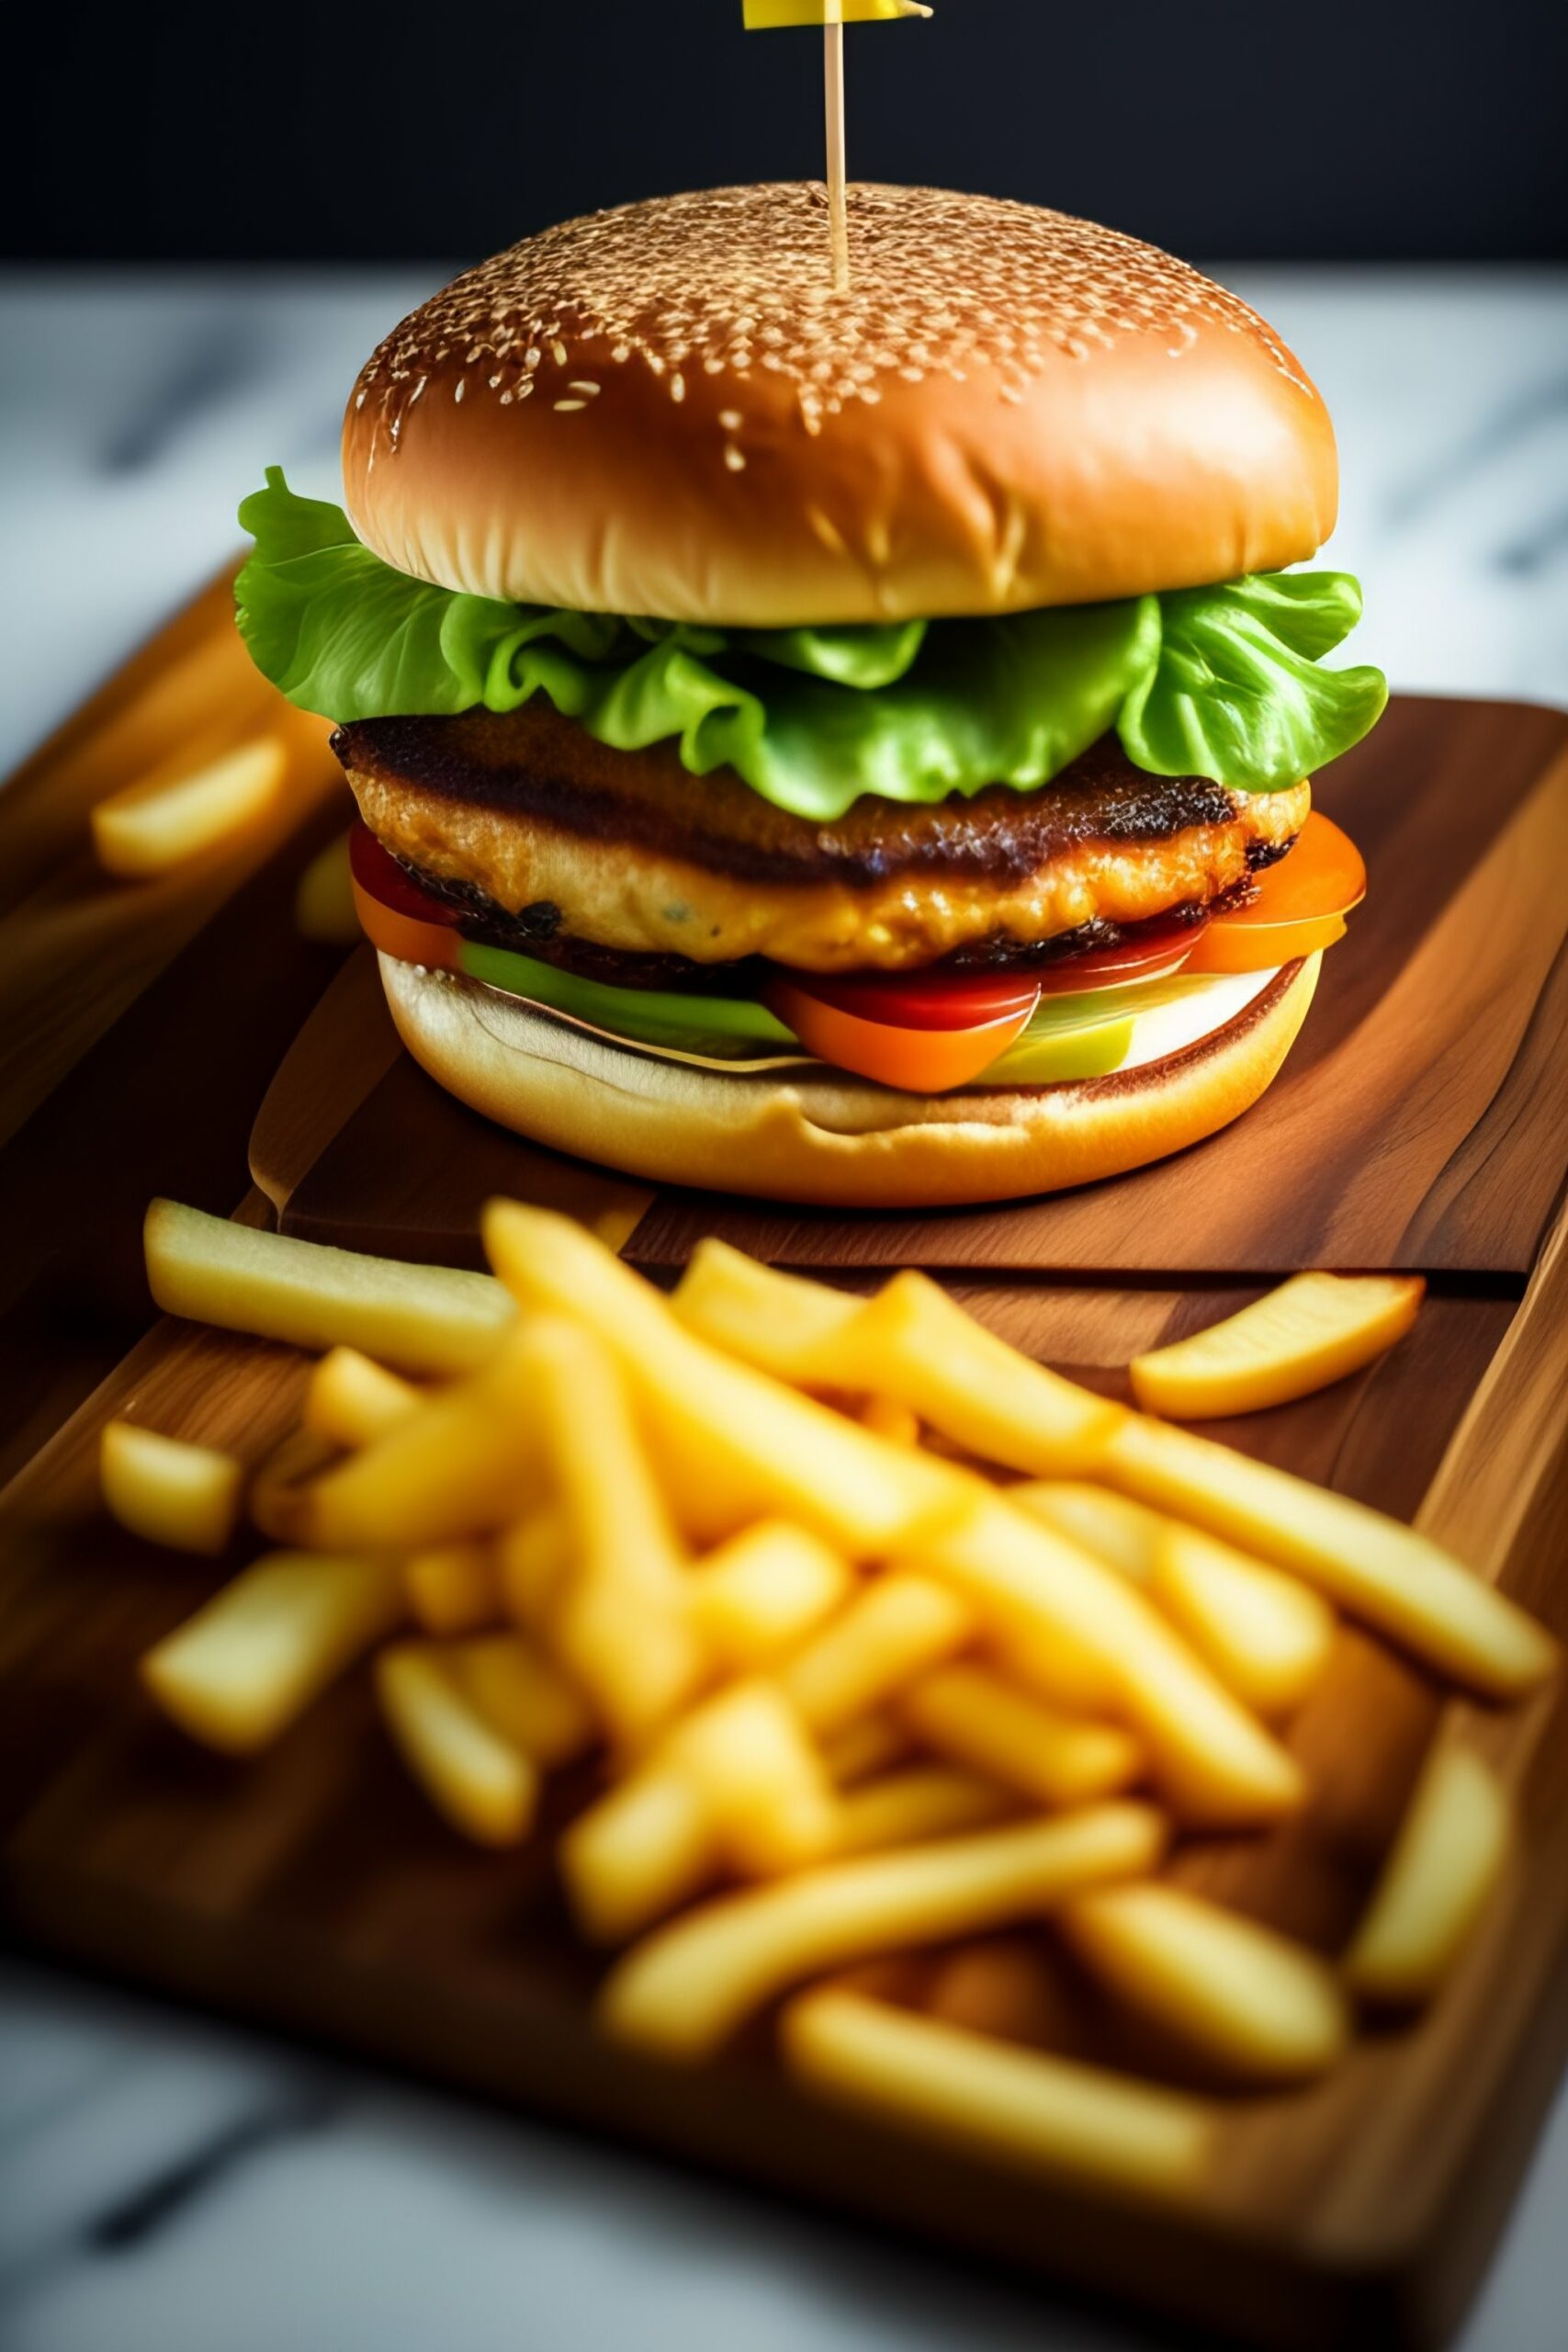 Health Balanced The Rise of Fast Food and Its Effects on Society